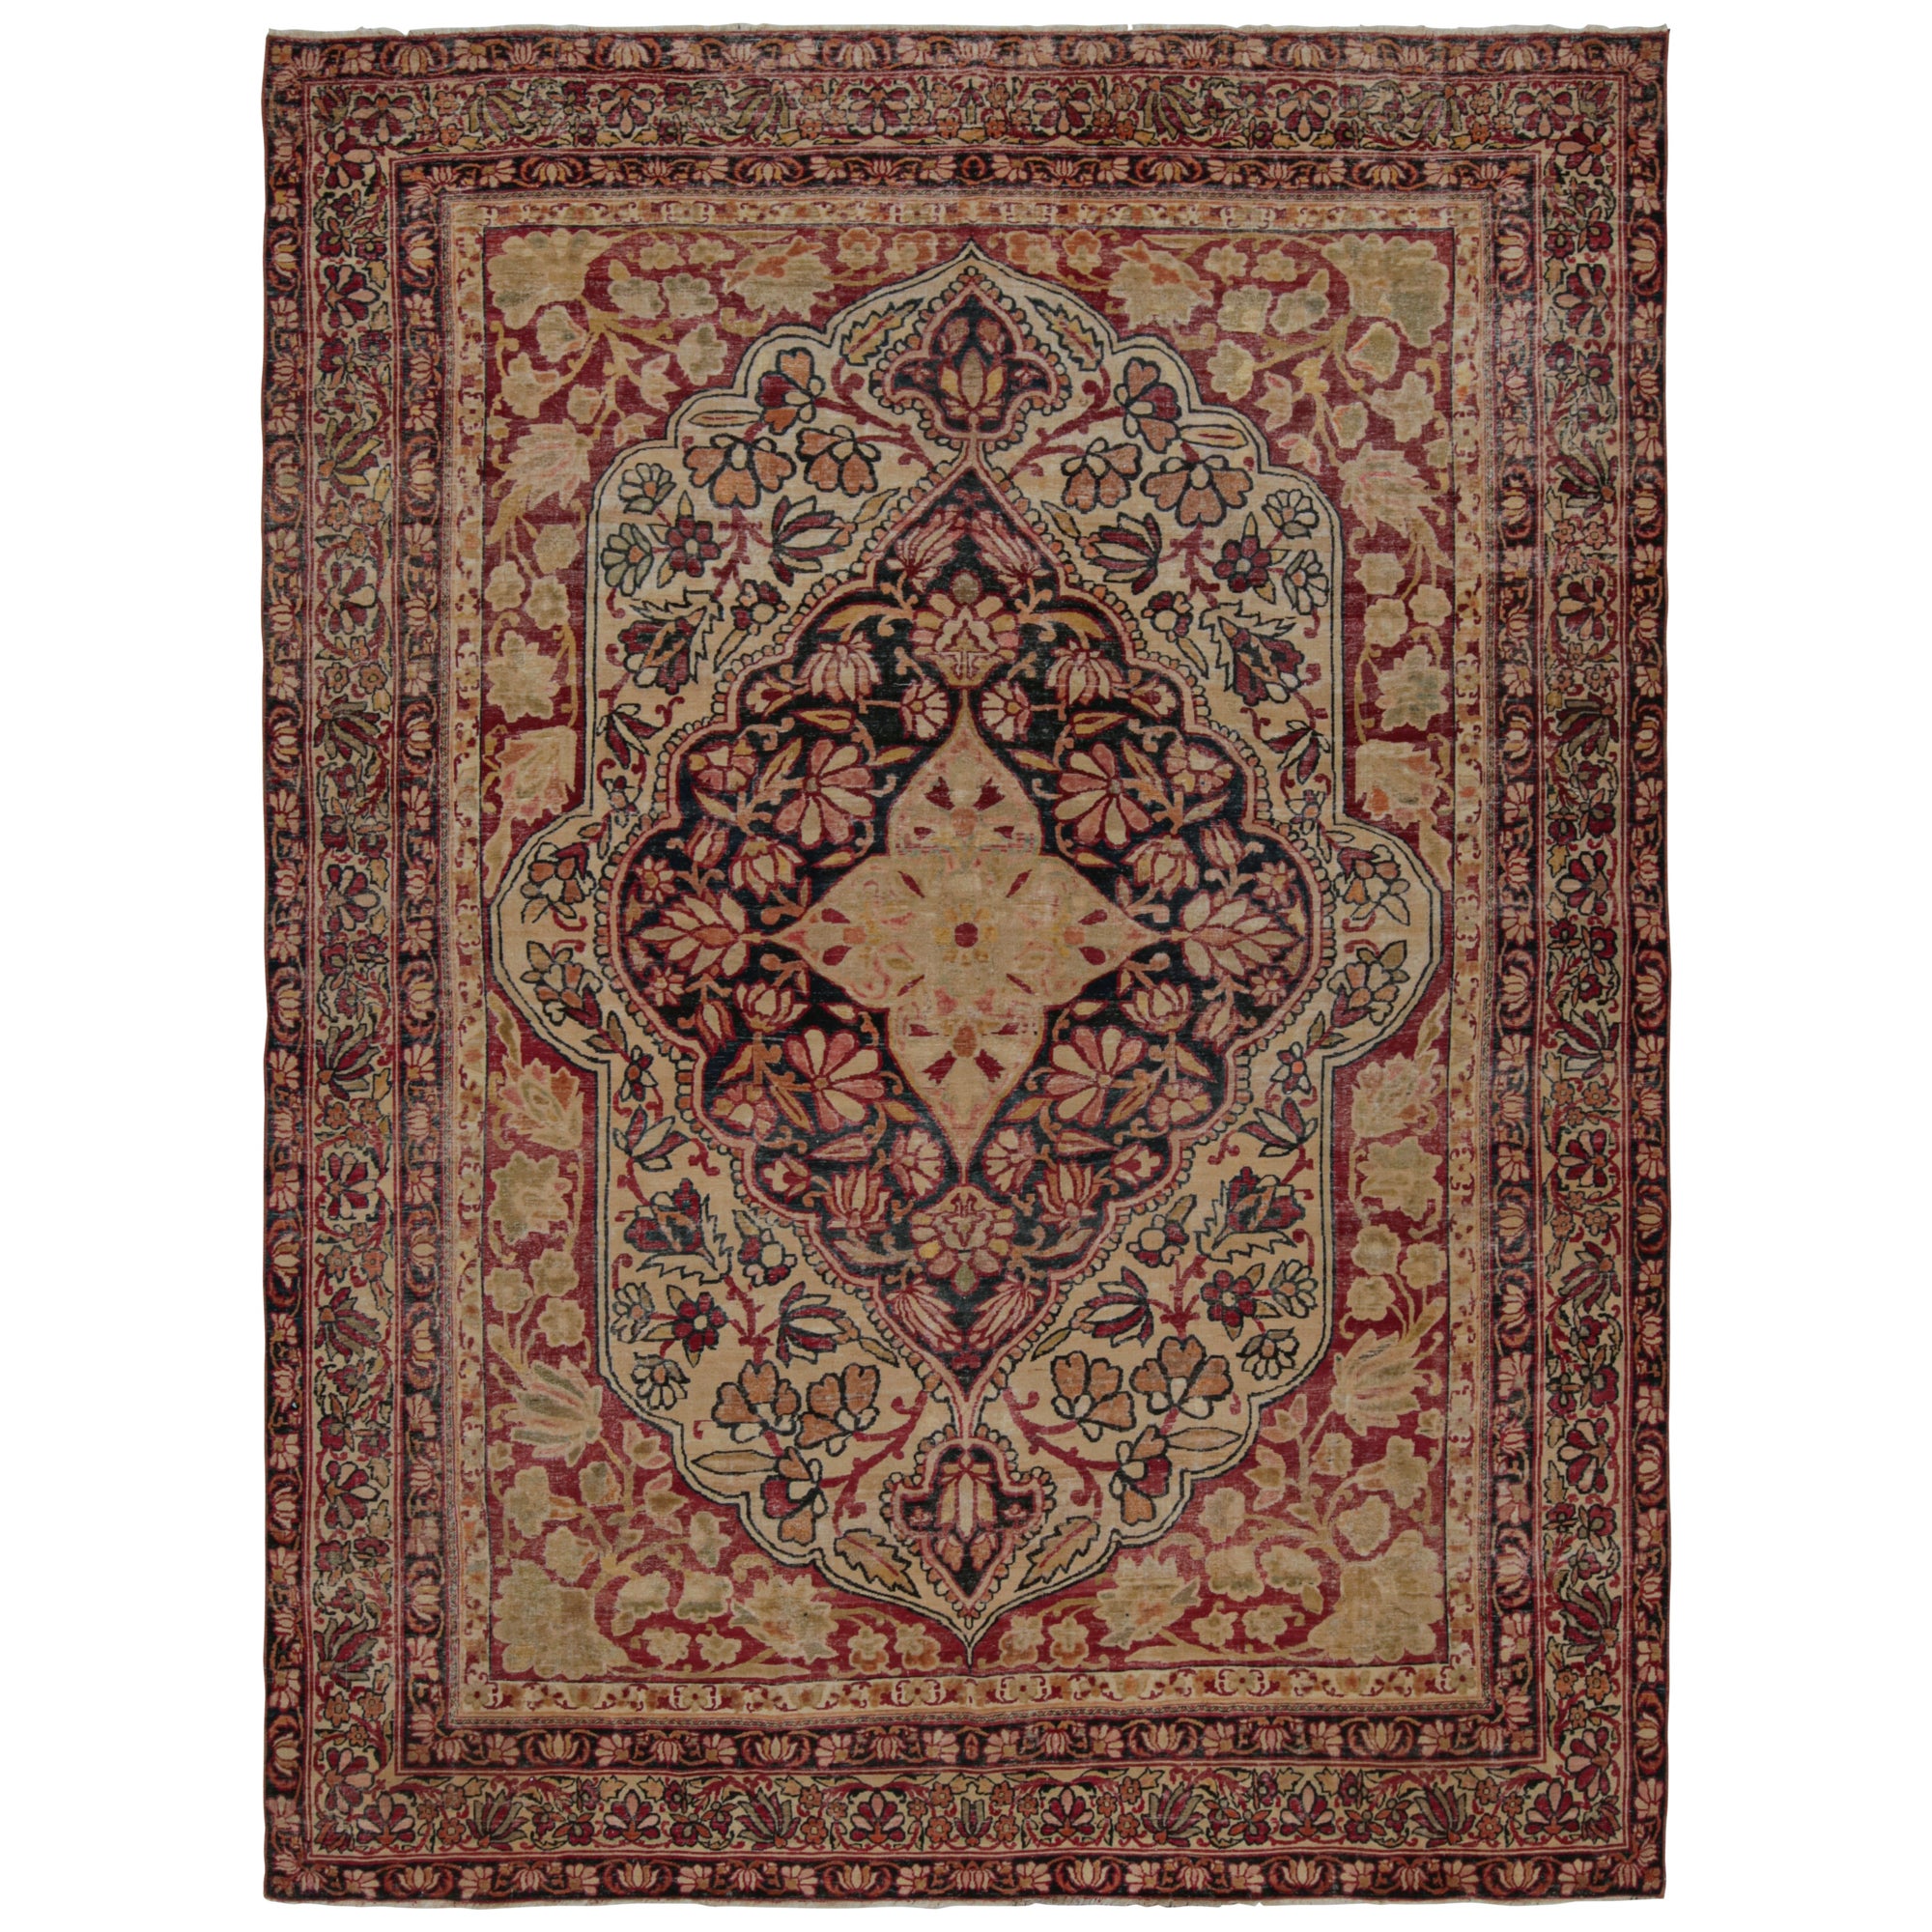 Antique Persian Kerman Lavar rug, with Floral Patterns, from Rug & Kilim